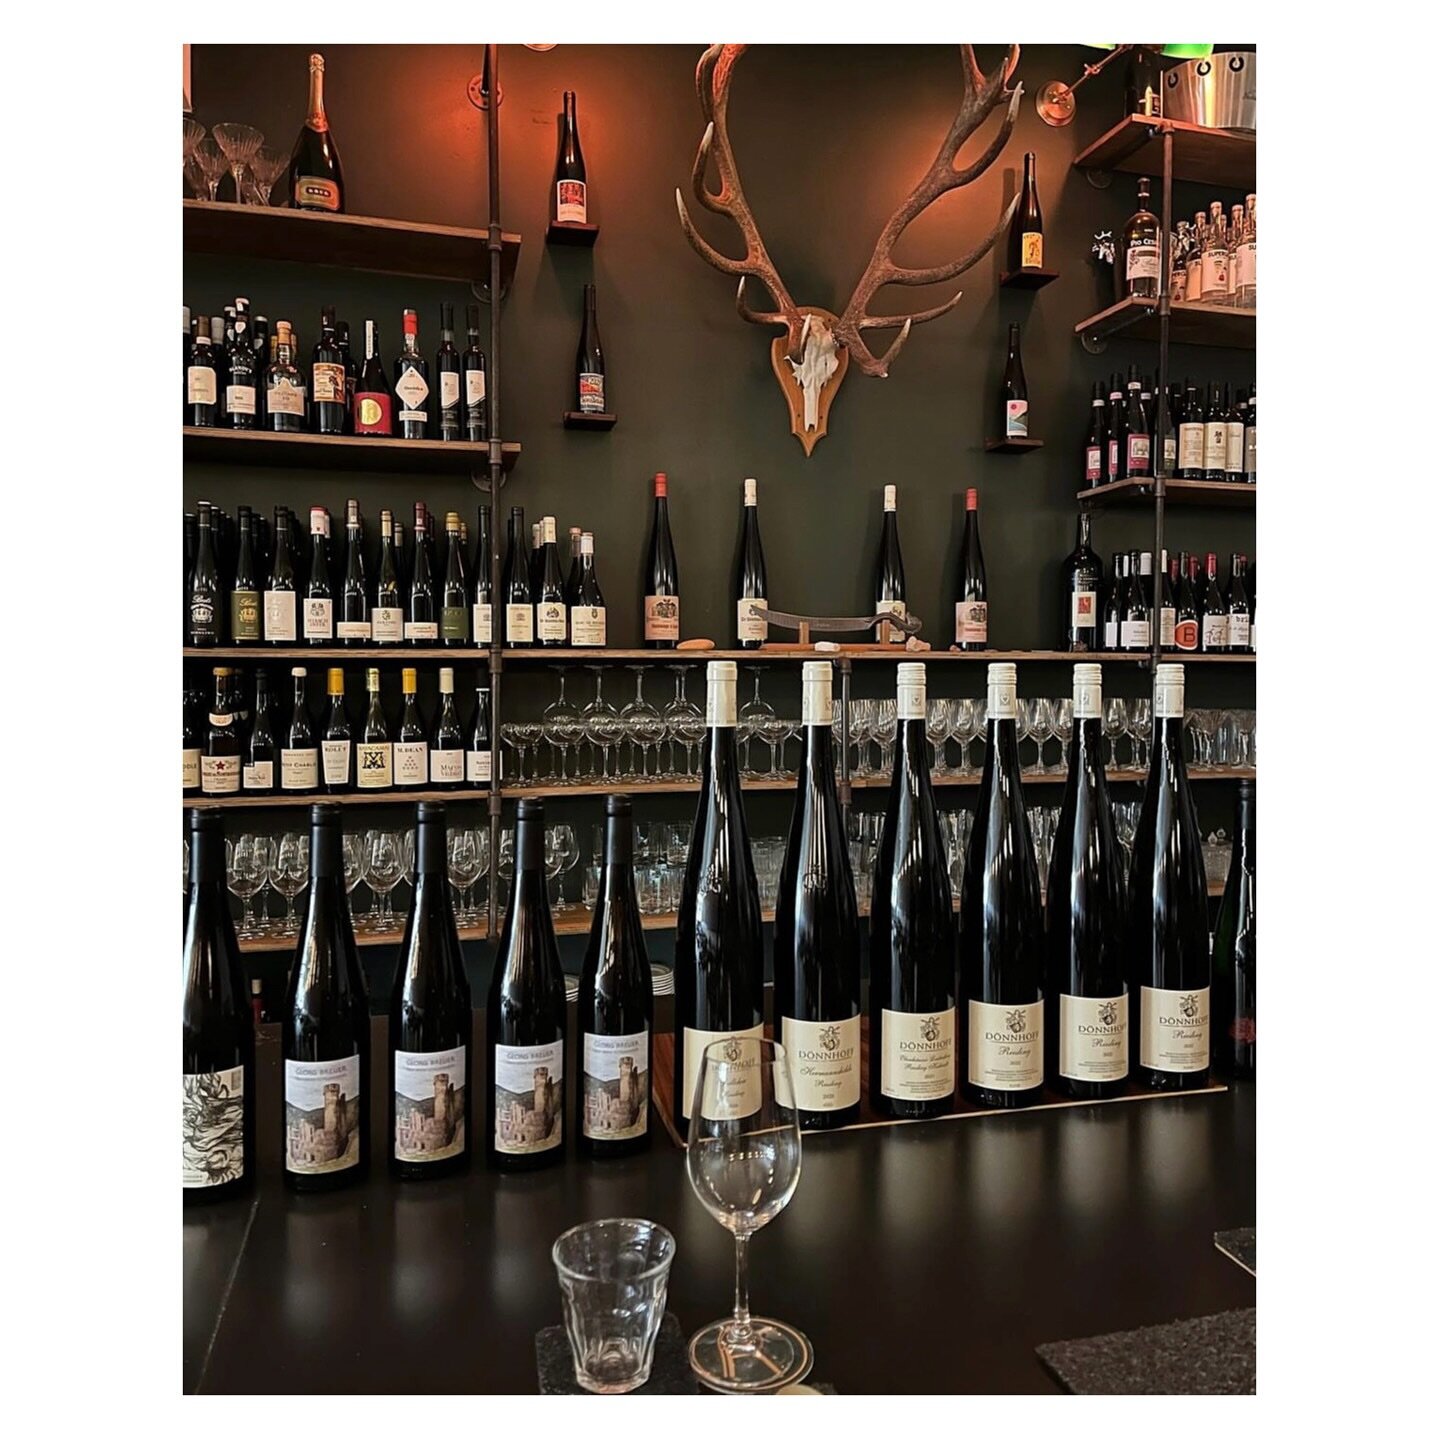 A reminder that we are fully booked tonight for our second German wine dinner&mdash;normal dinner service resumes Friday from 5pm. It&rsquo;s the weekend; for guaranteed deliciousness, we recommend reservations if you plan on joining us for dinner (w